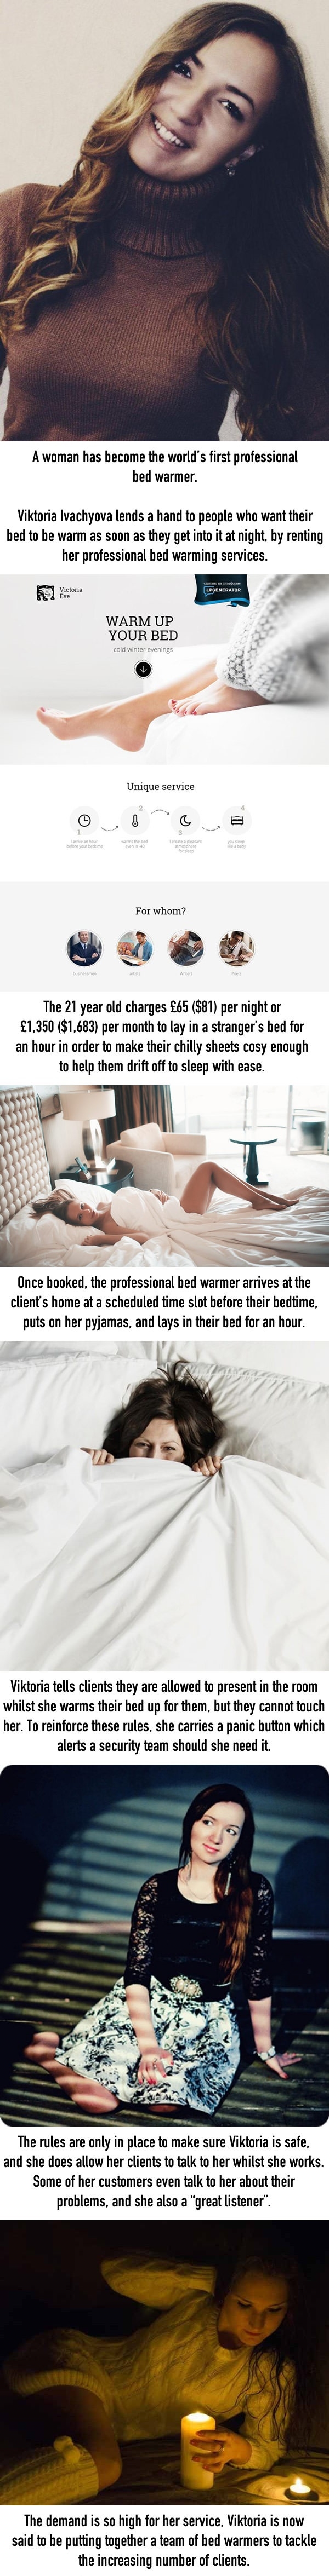 The 'world's first' professional bed warmer